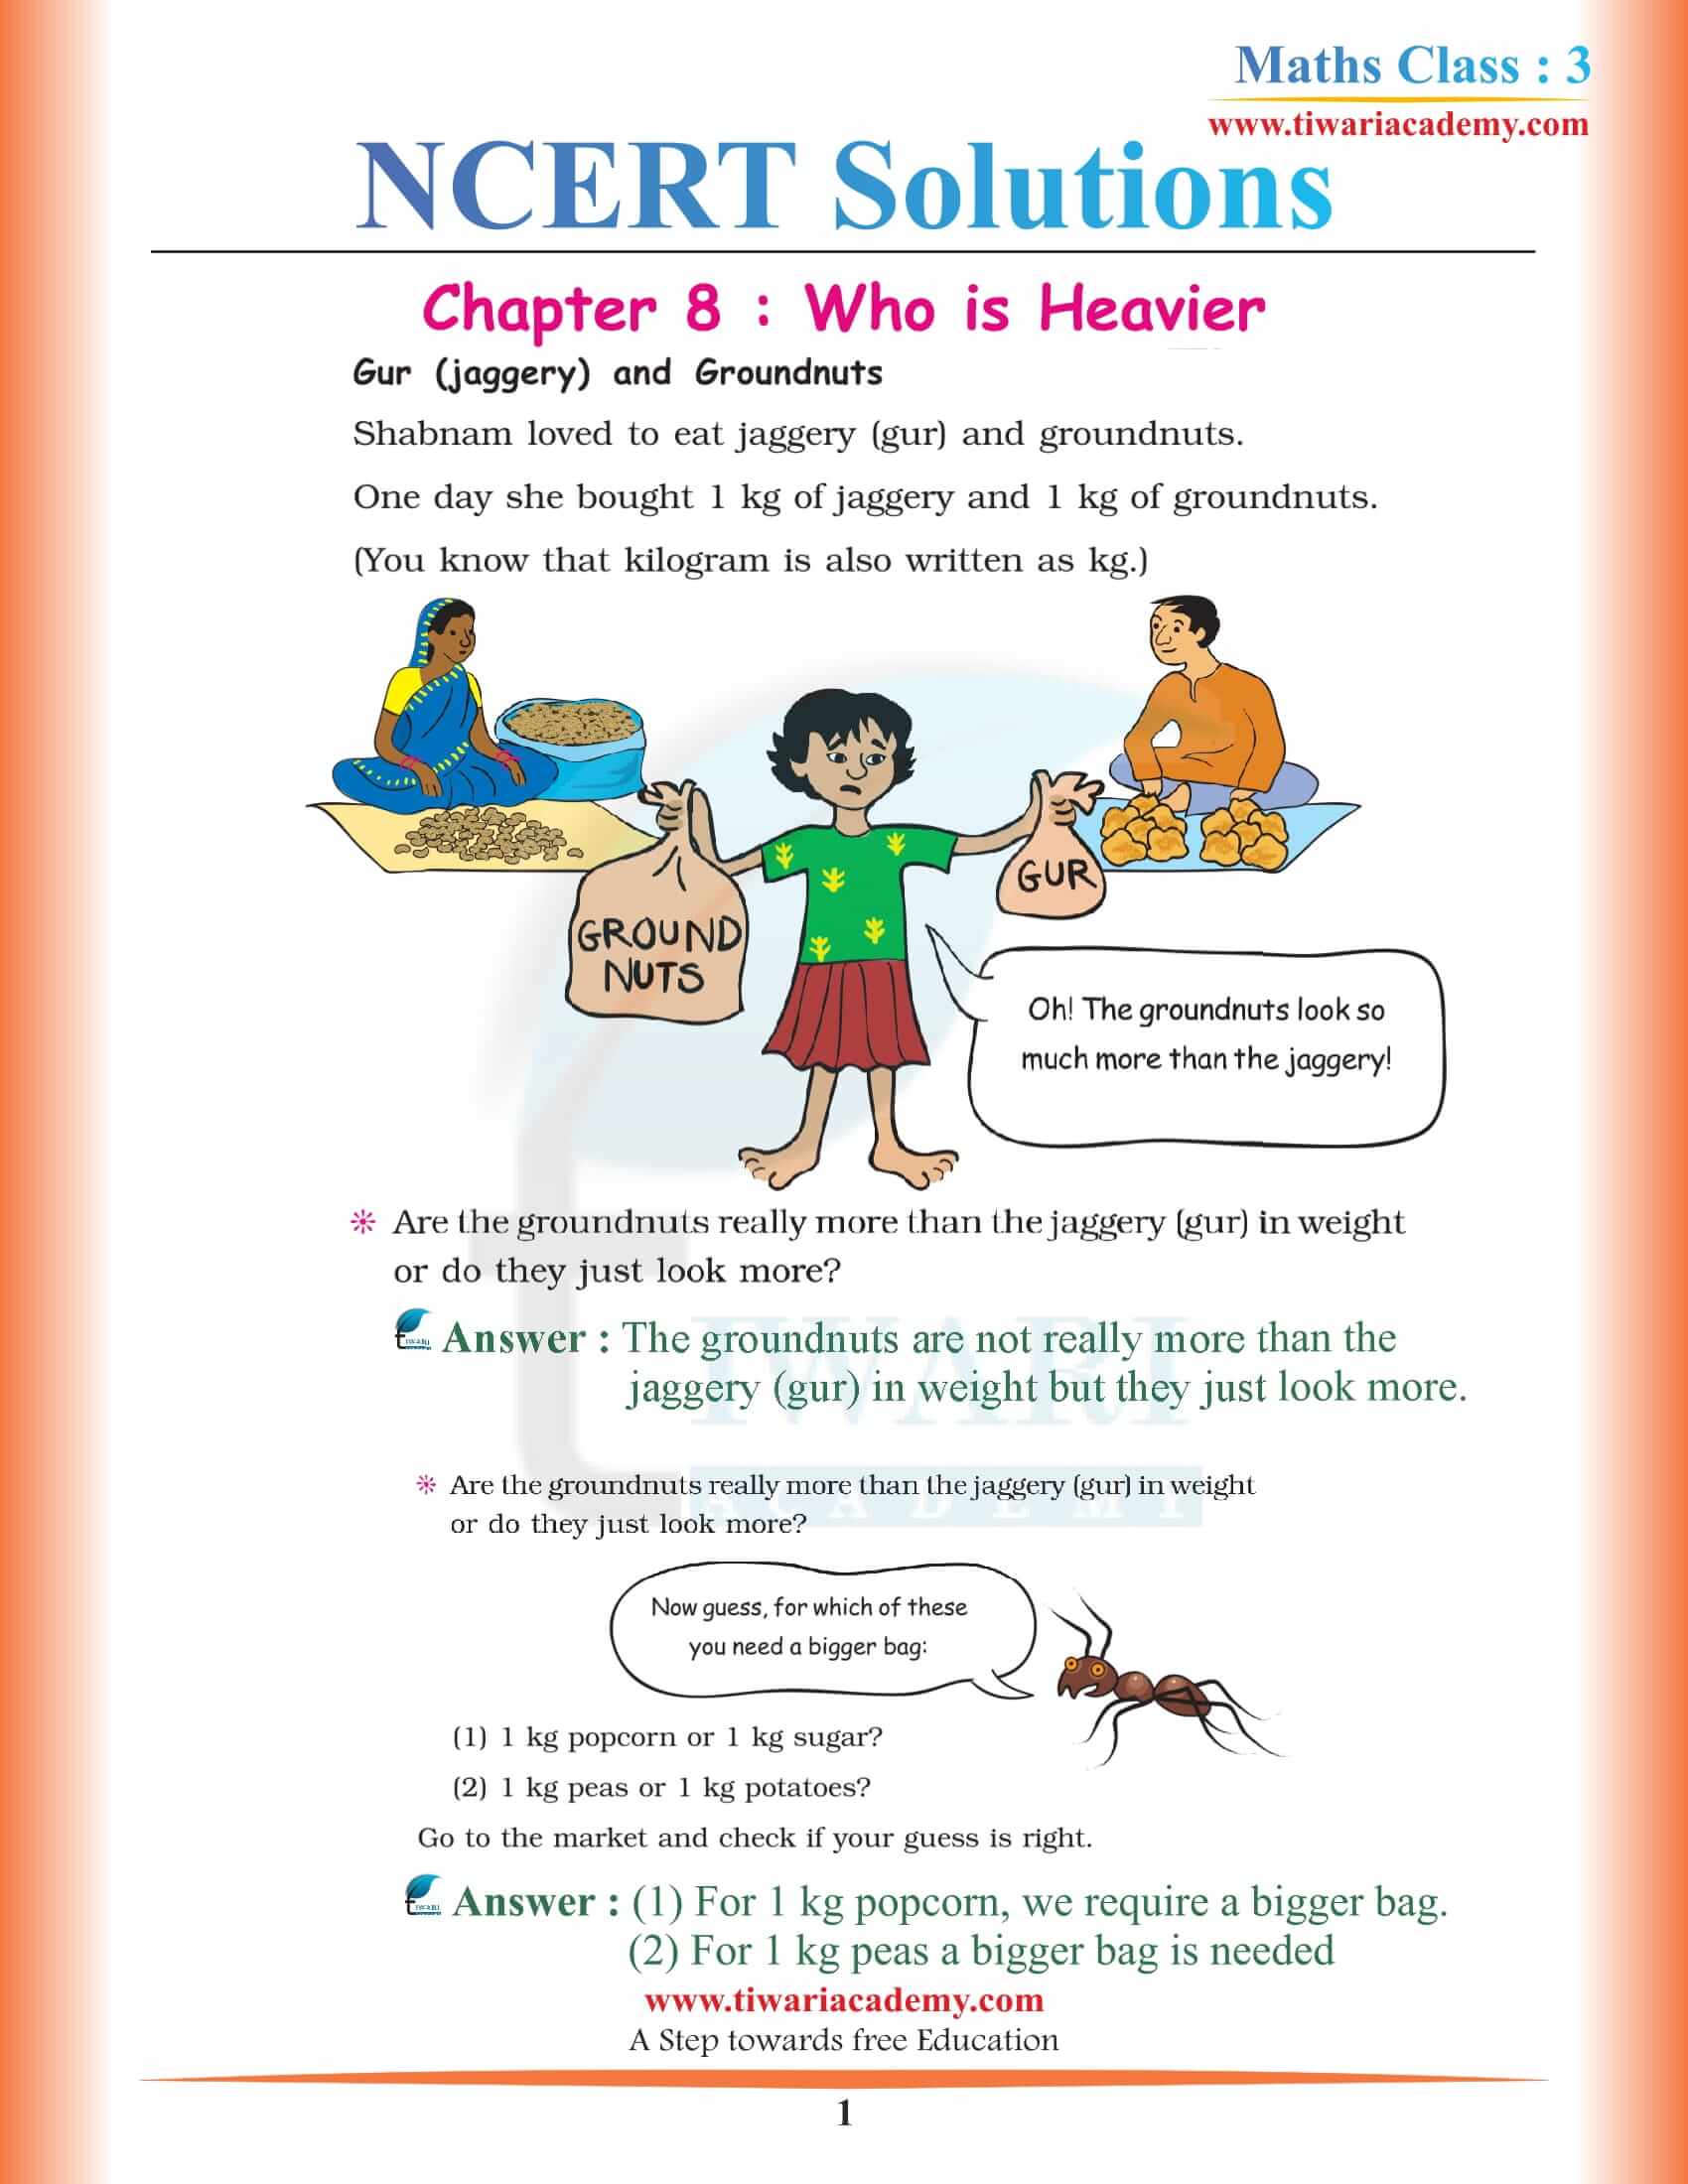 NCERT Solutions for Class 3 Maths Chapter 8 Who is Heavier?